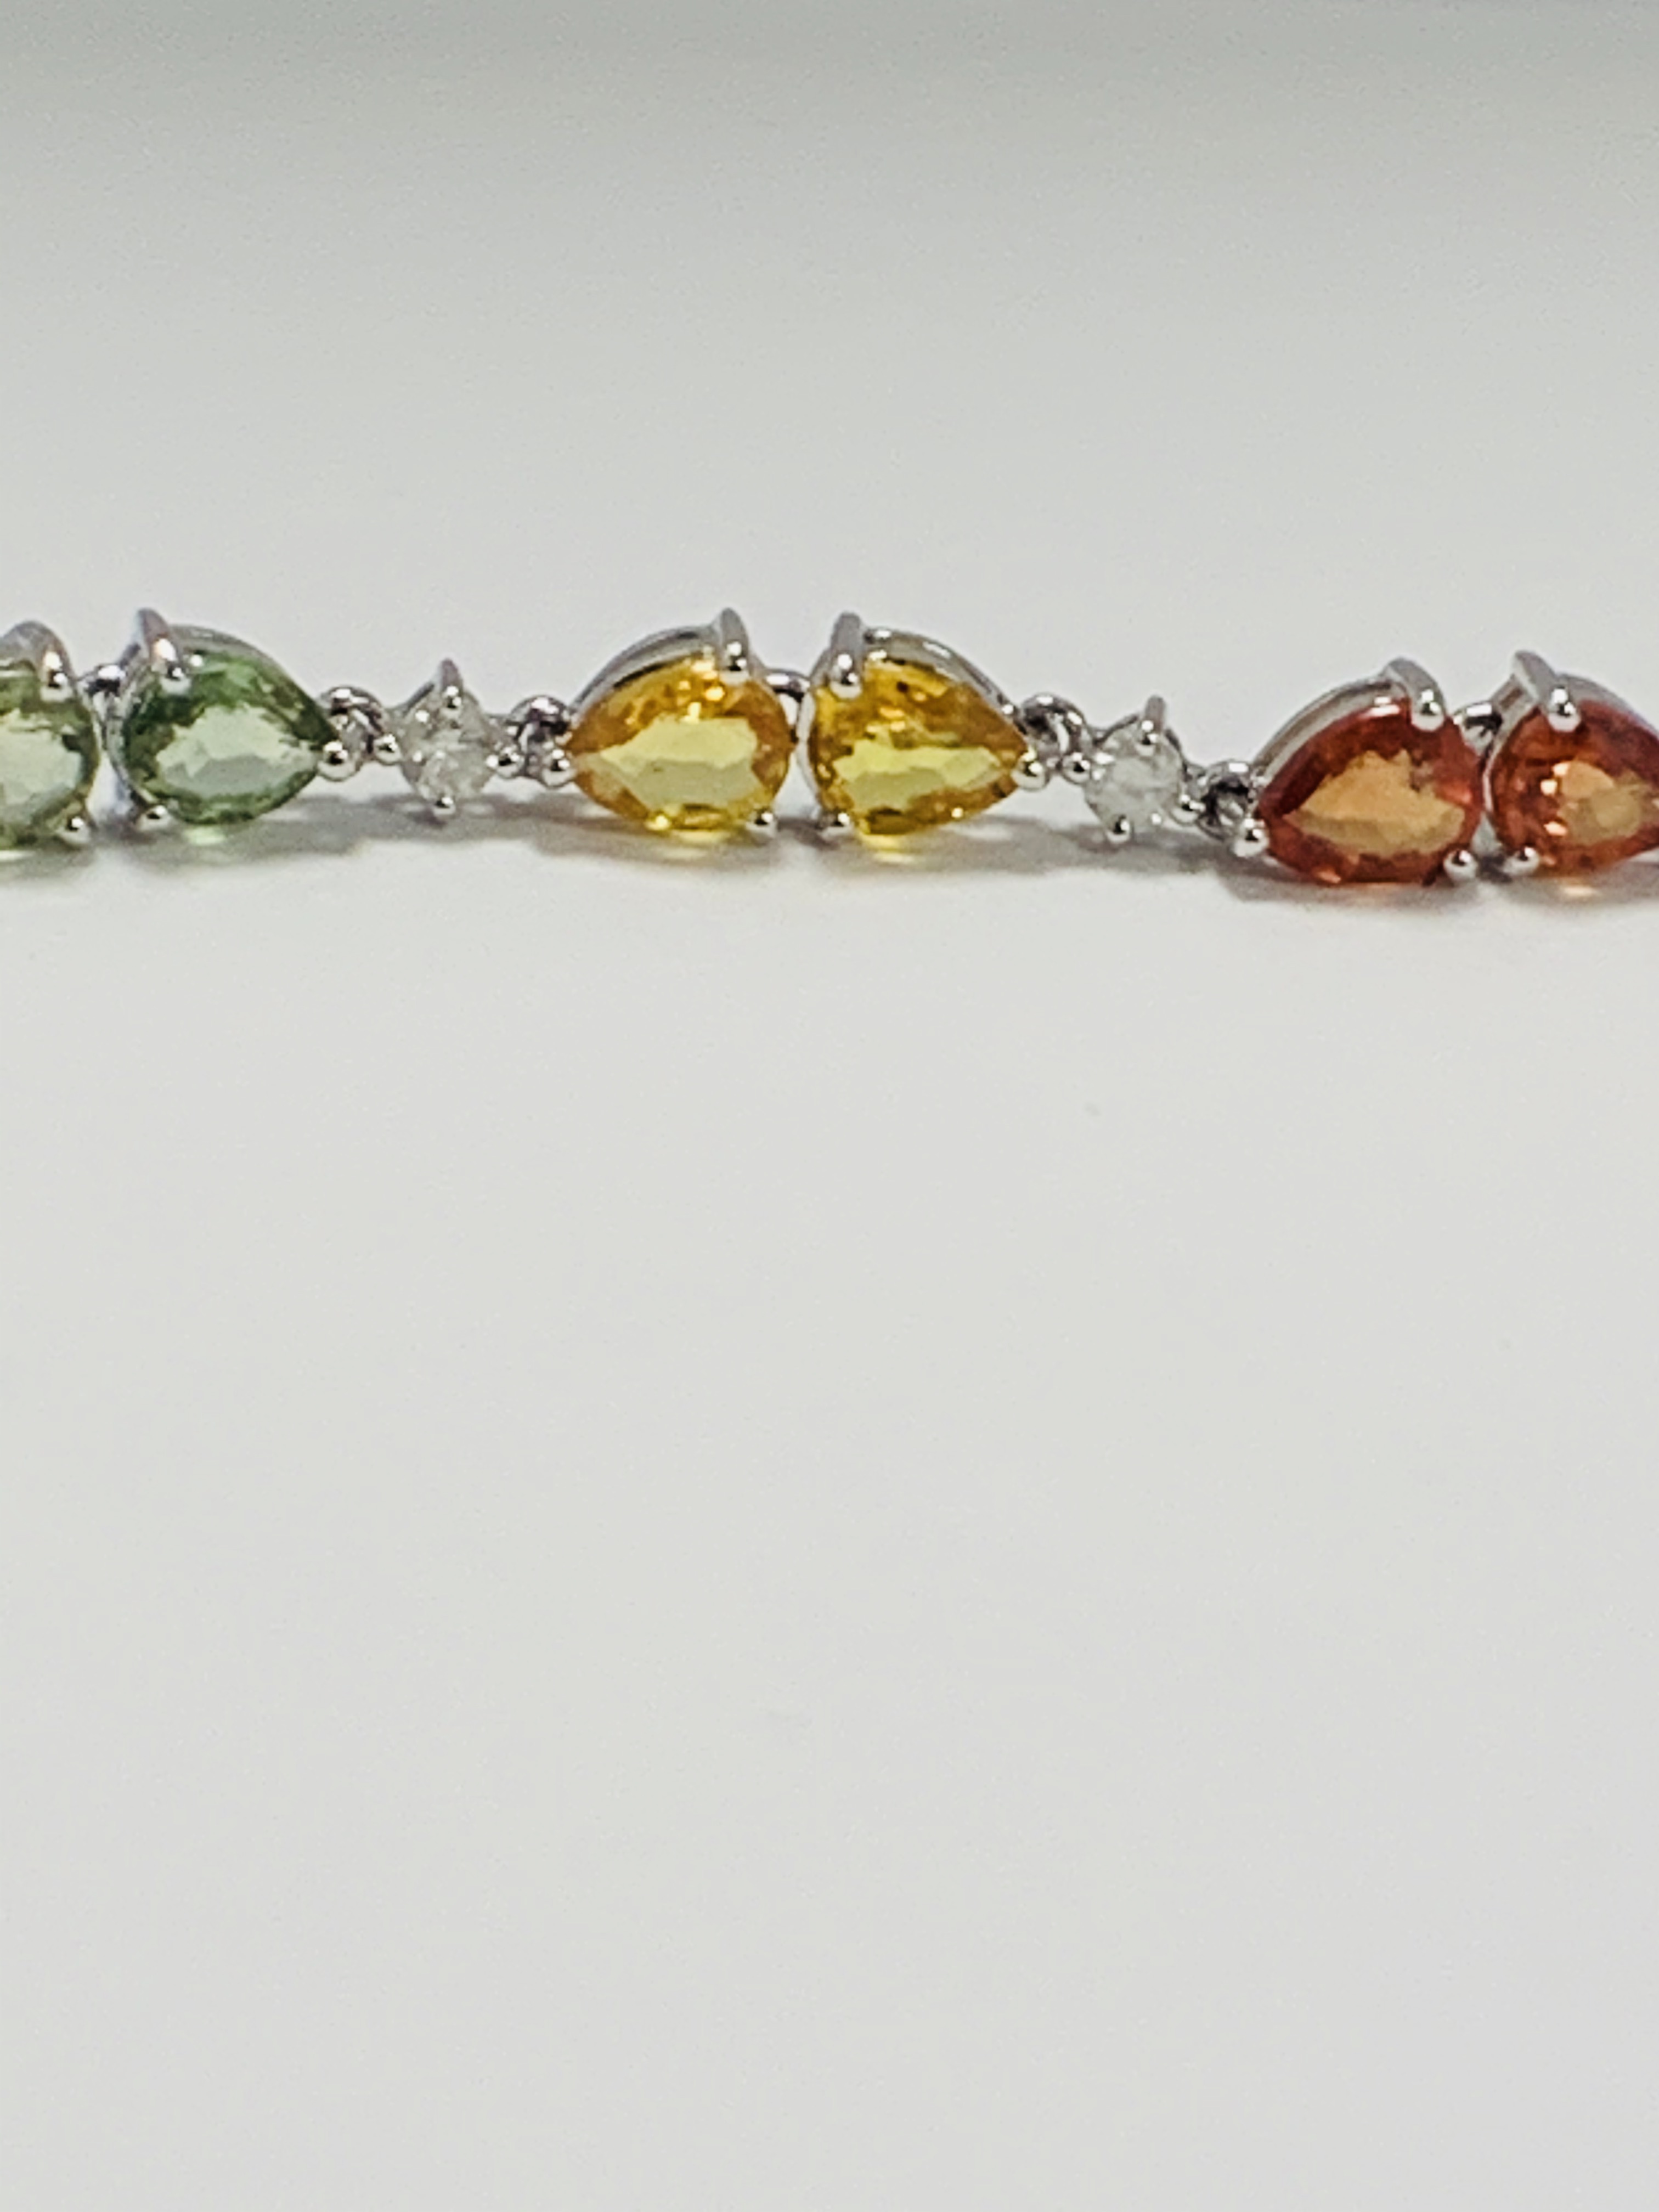 14ct White Gold Sapphire and Diamond bracelet featuring, 22 pear cut, yellow, green and orange Sapph - Image 8 of 24